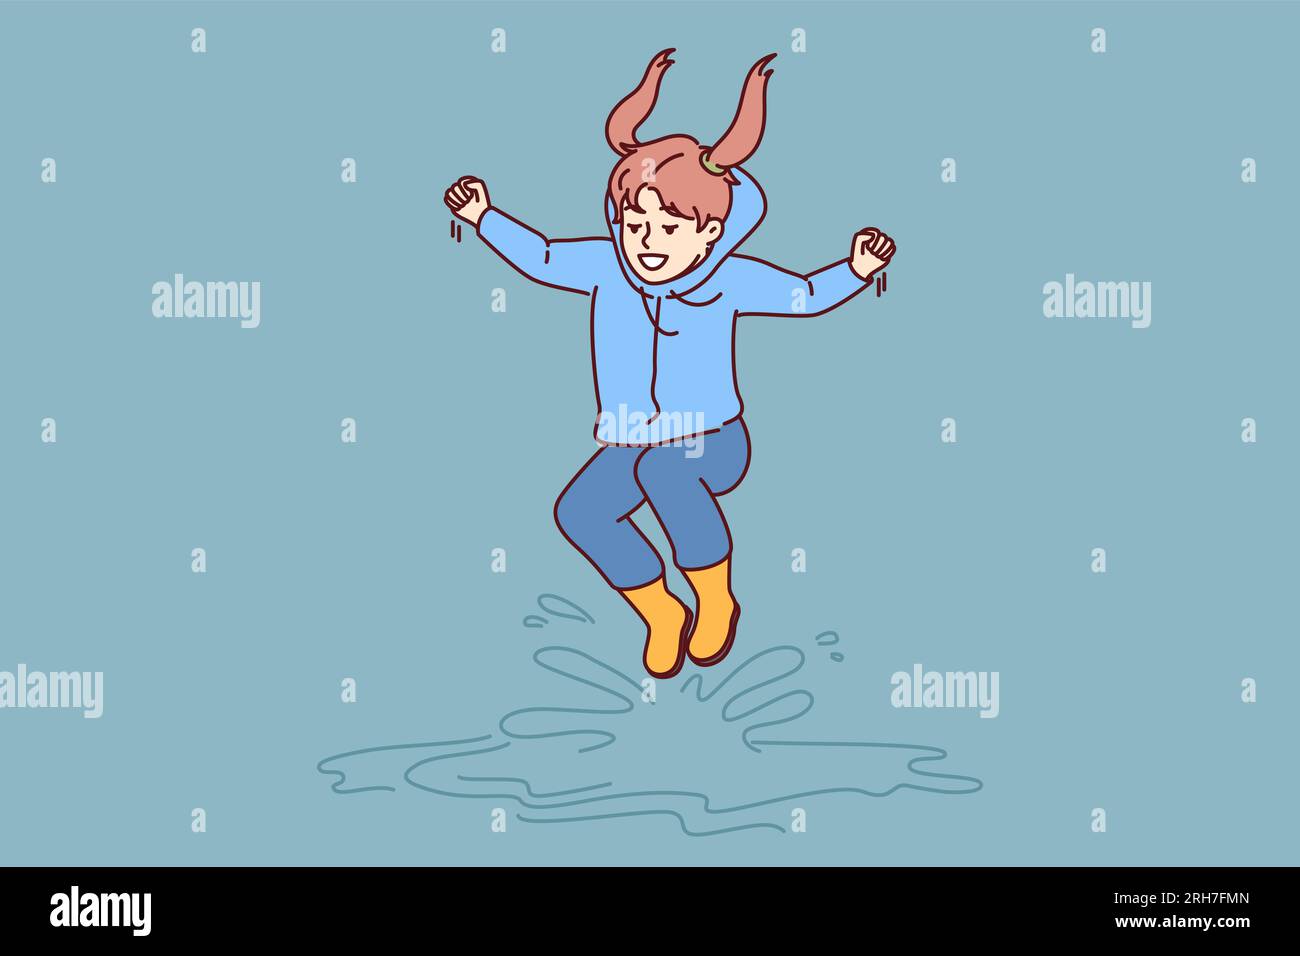 Little girl jumps in puddles in rubber boots and enjoys rainy autumn weather. Laughing child dressed in raincoat plays and bounces in puddles and has fun rejoicing in walk in fresh air Stock Vector